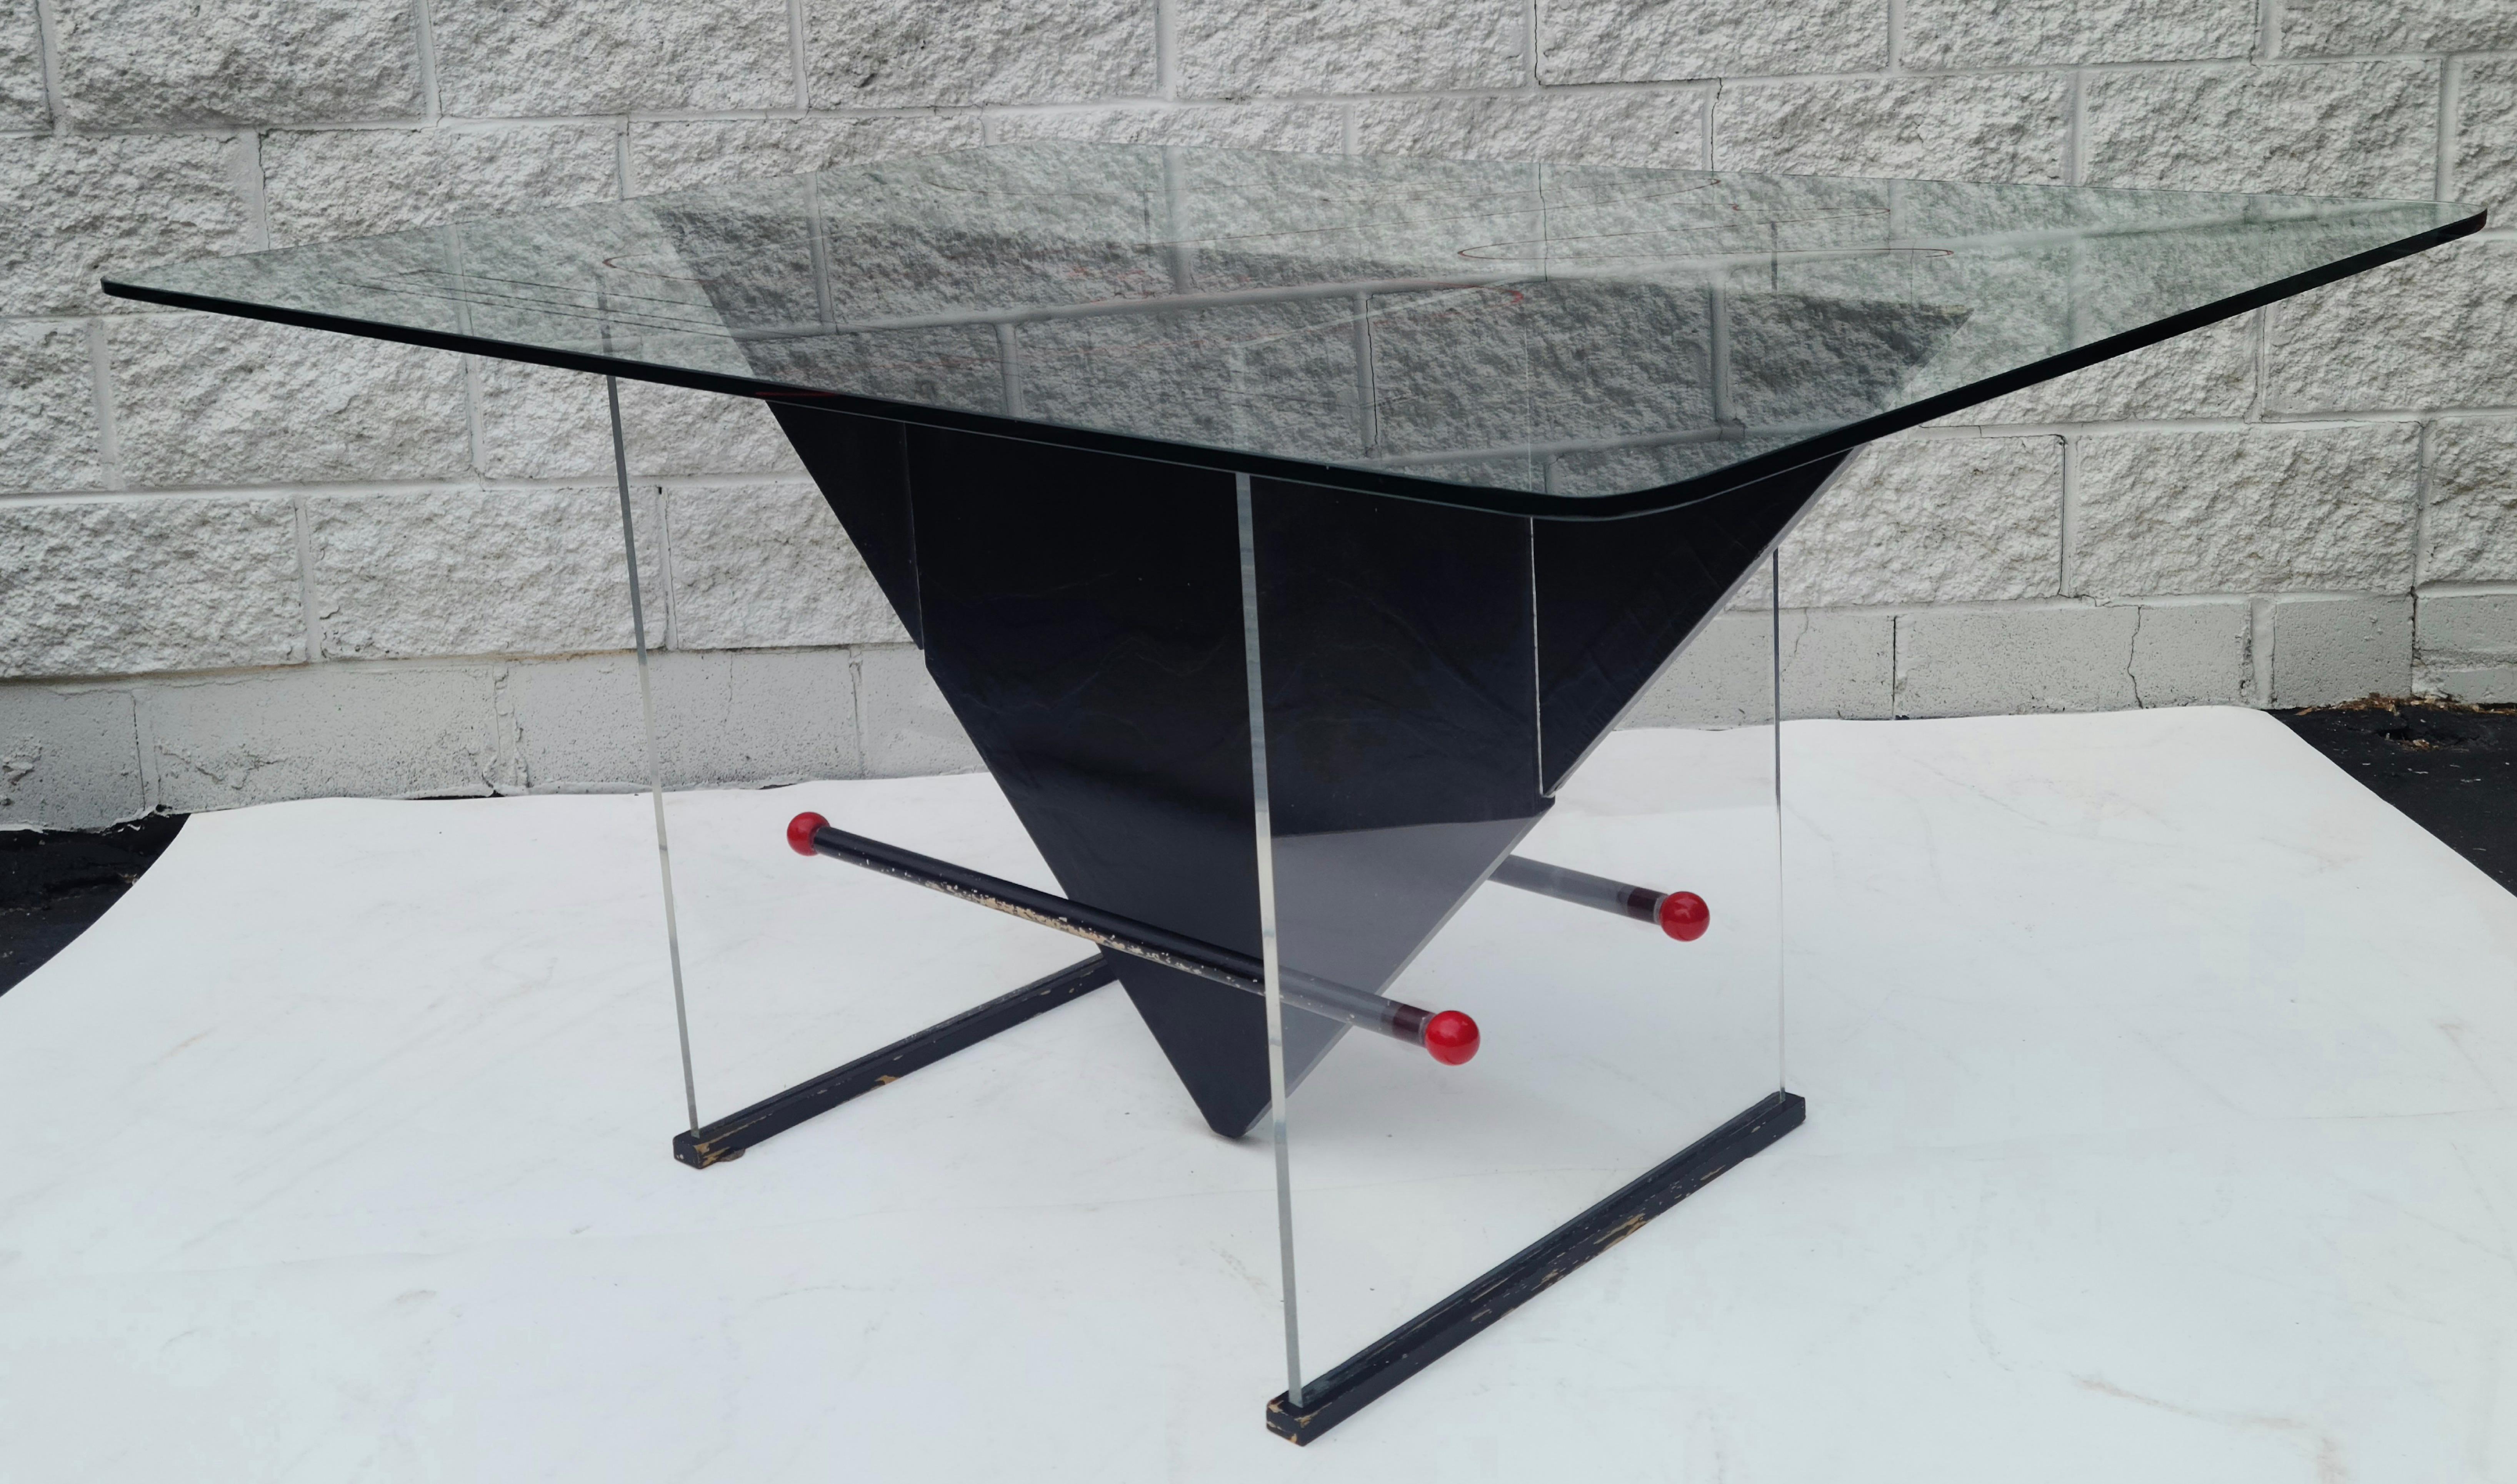 Memphis Style Glass Top Dining Table Lines Planes Points In Good Condition For Sale In Fraser, MI